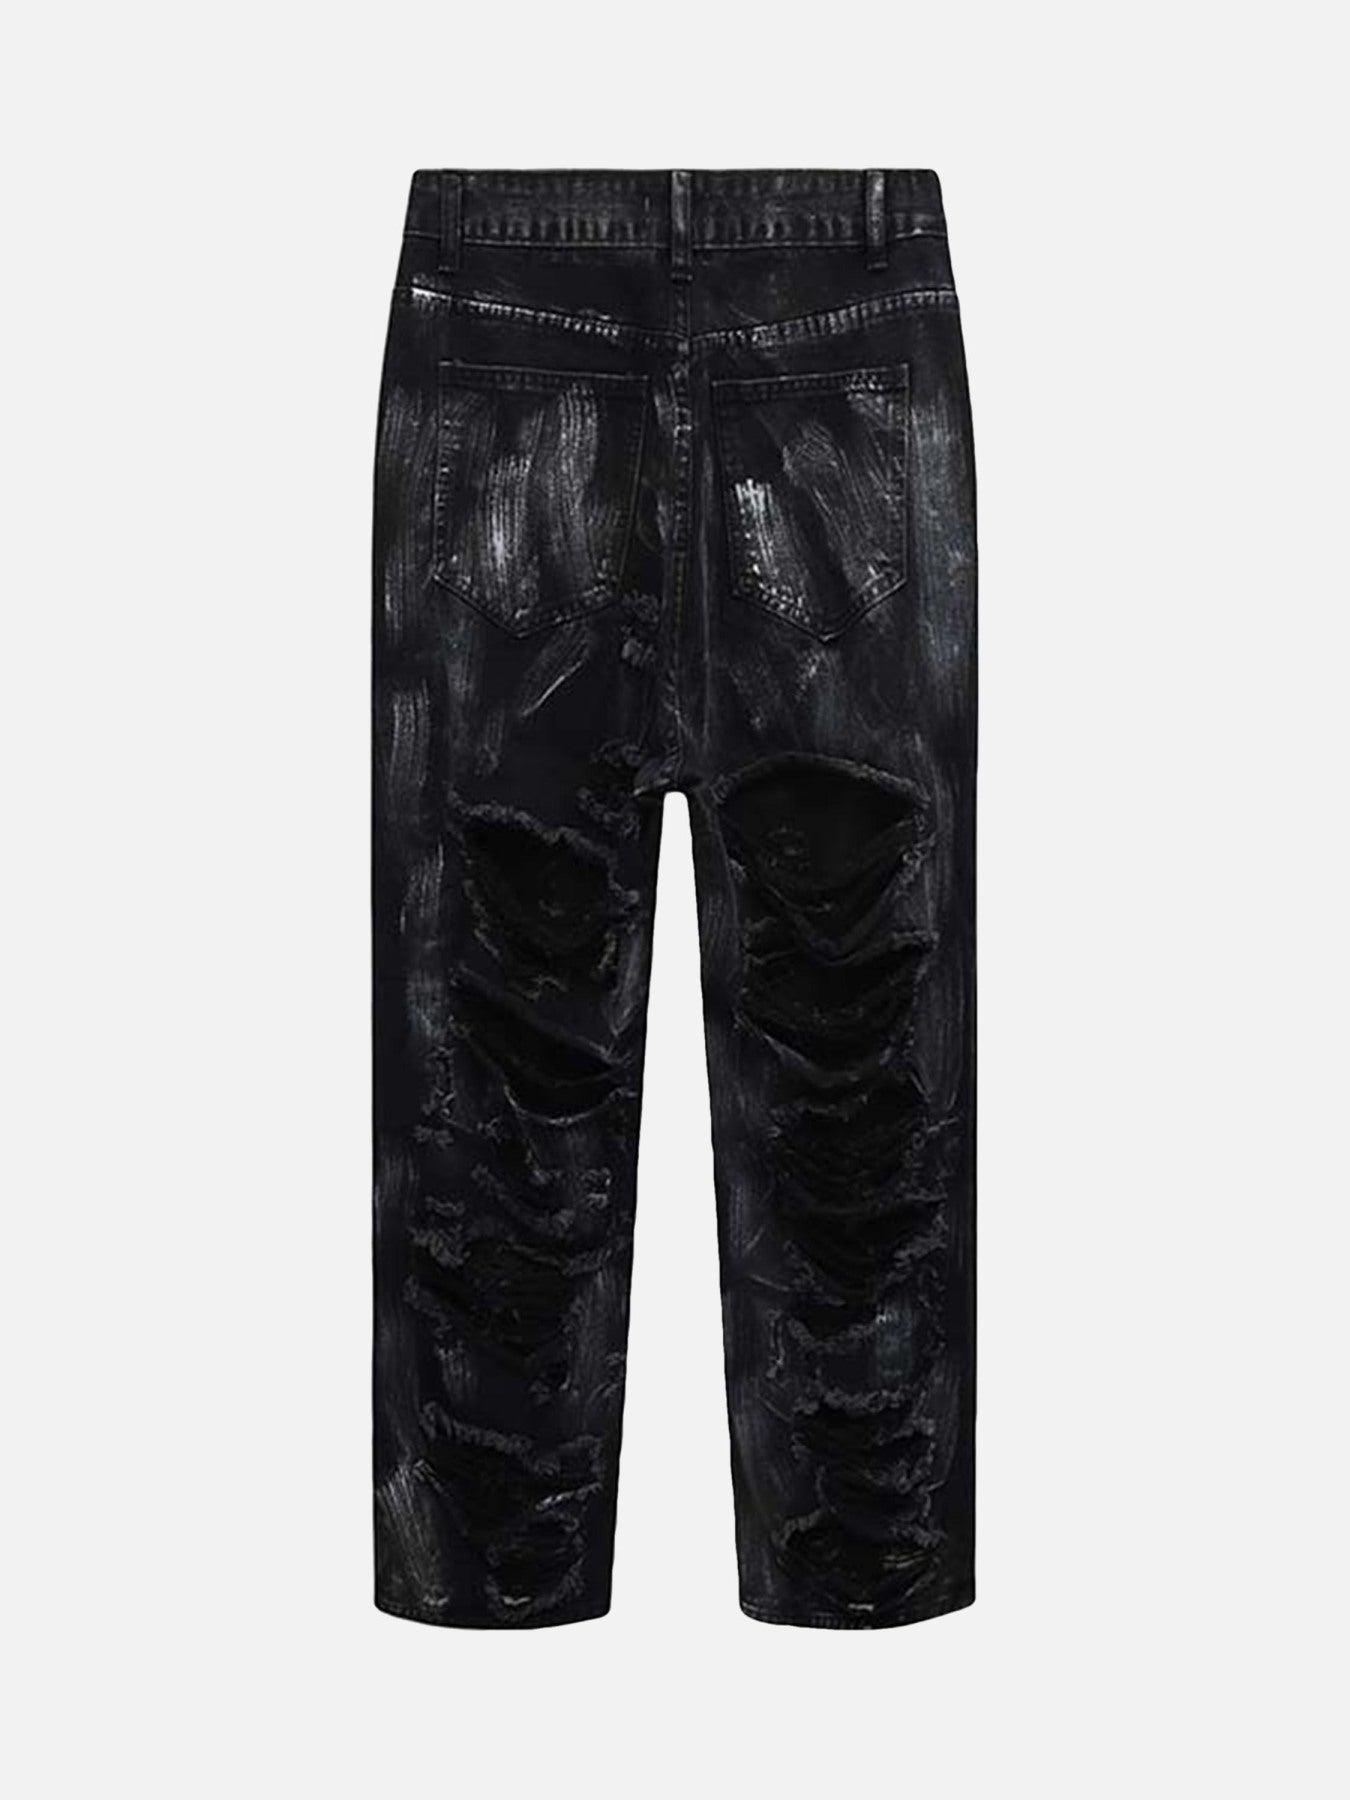 The Supermade Splash Ink On Ripped Jeans